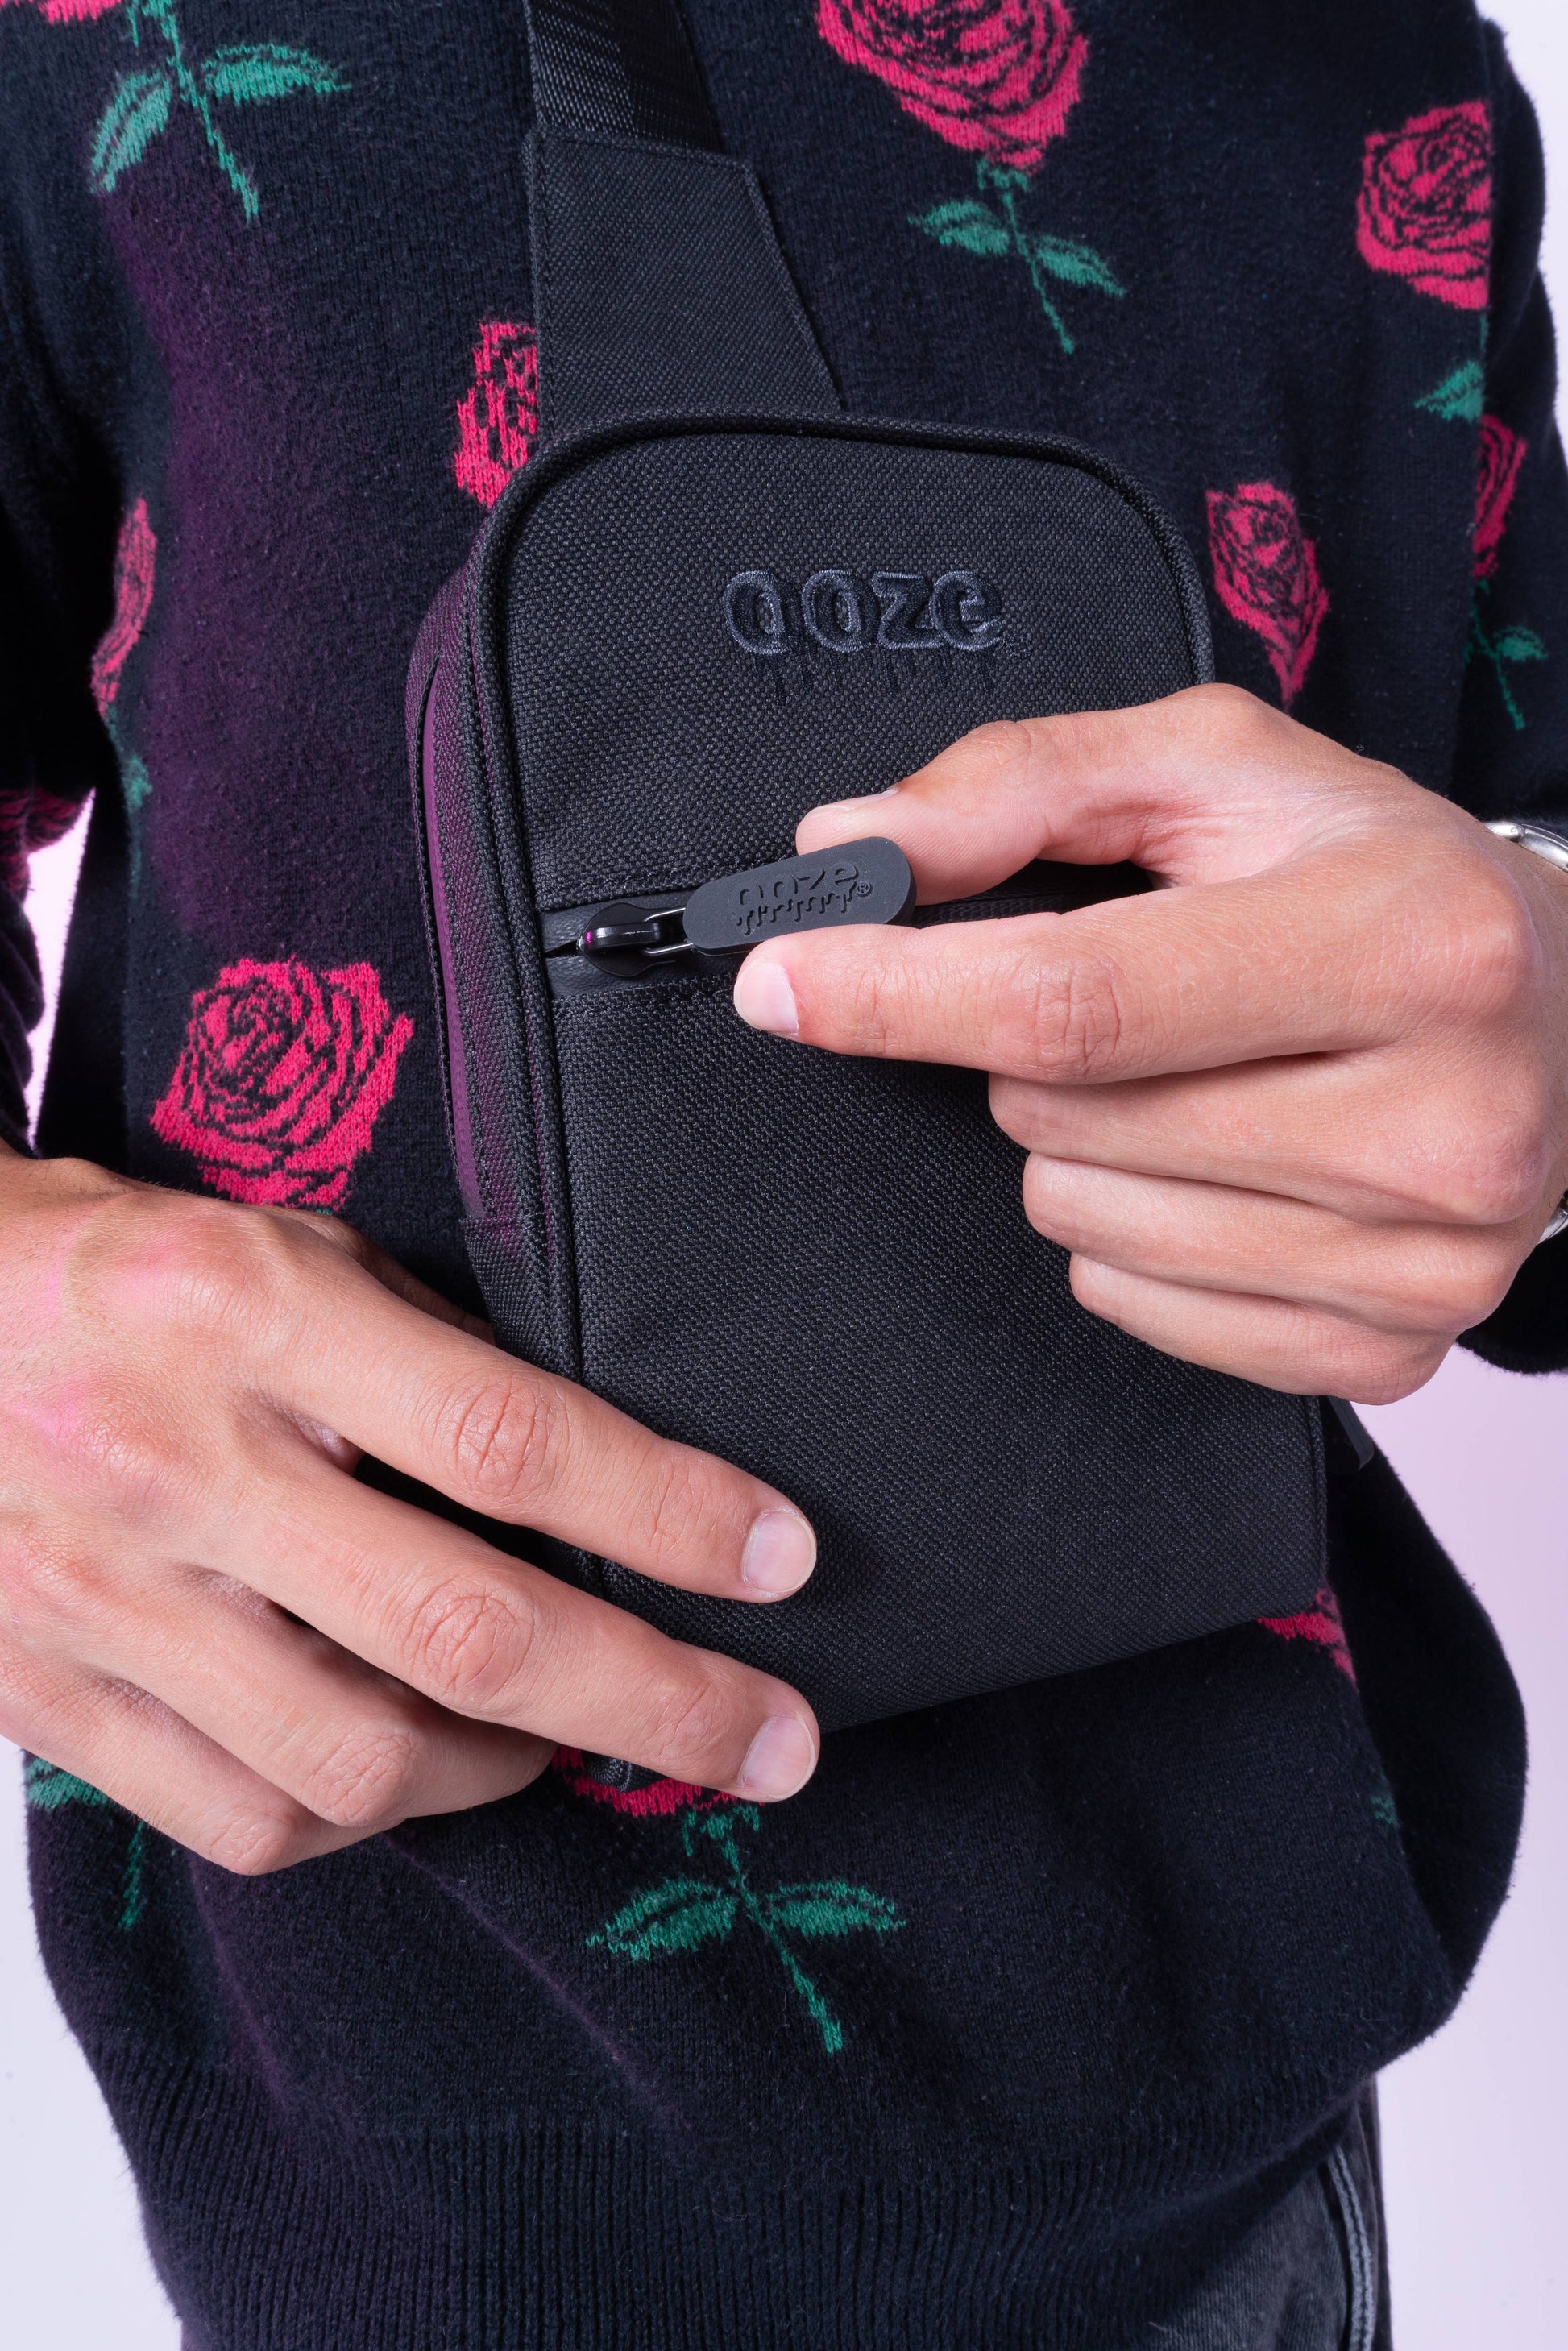 A guy in a rose sweater is wearing the black Ooze crossbody bag and unzipping the front pocket